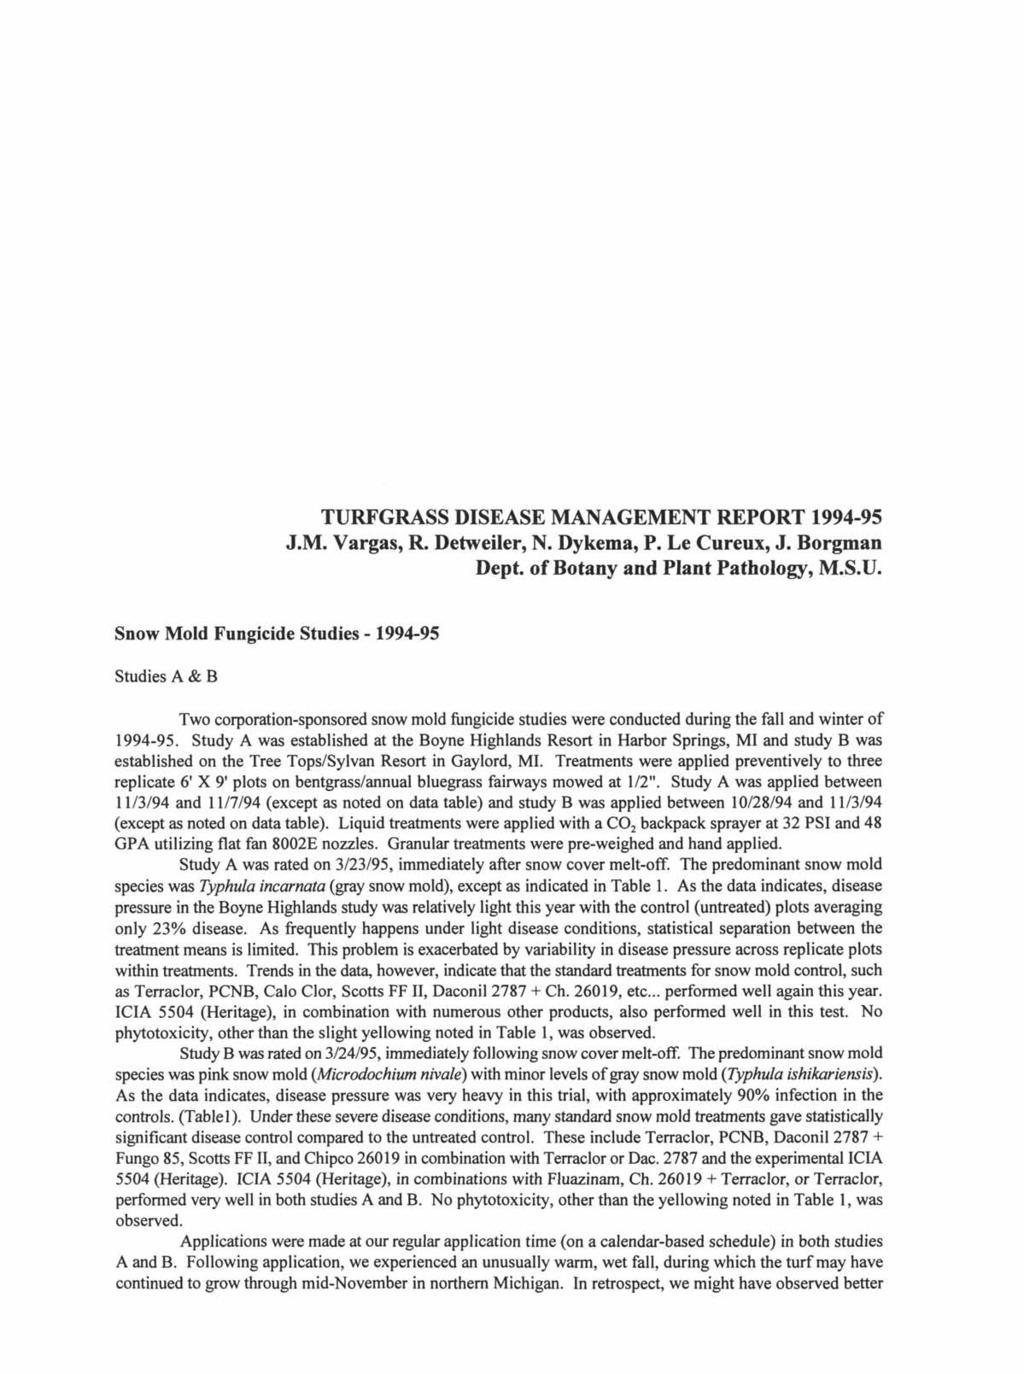 TURFGRASS DISEASE MANAGEMENT REPORT 1994-95 J.M. Vargas, R. Detweiler, N. Dykema, P. Le Cureux, J. Borgman Dept. of Botany and Plant Pathology, M.S.U. Snow Mold Fungicide Studies - 1994-95 Studies A & B Two corporation-sponsored snow mold fungicide studies were conducted during the fall and winter of 1994-95.